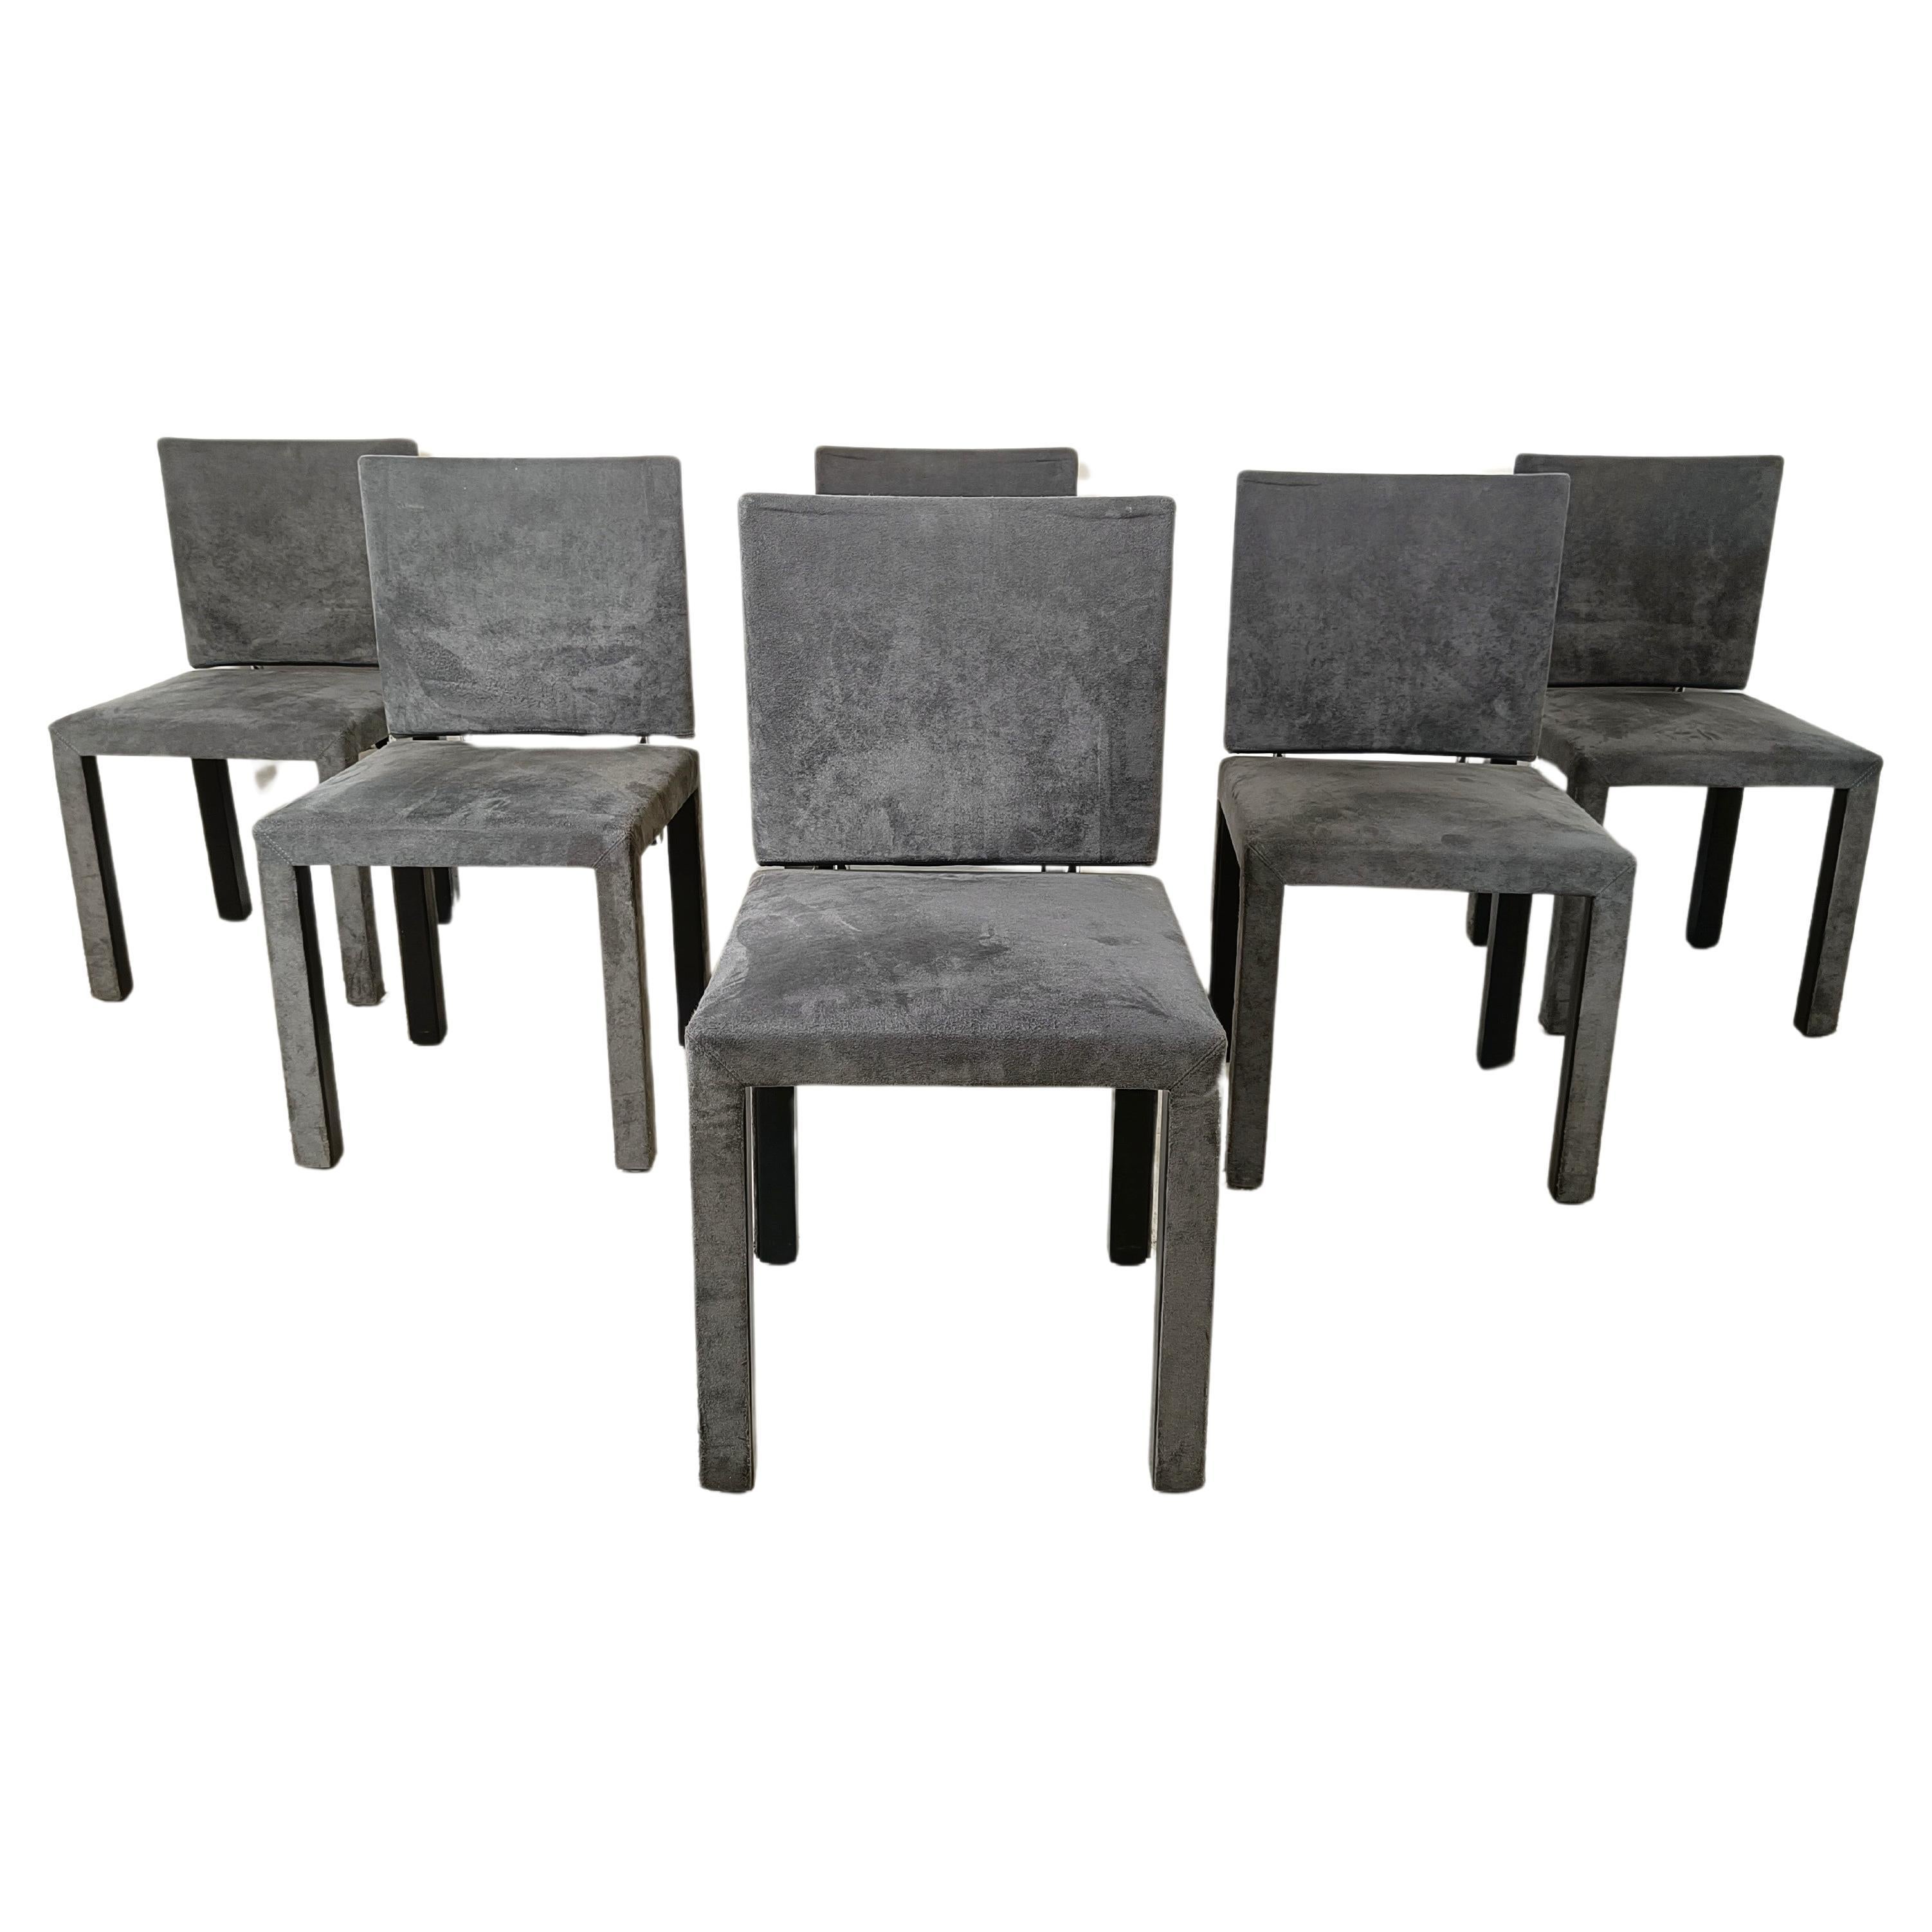 Arcadia dining chairs by Paolo Piva for B& B Italia set of 6